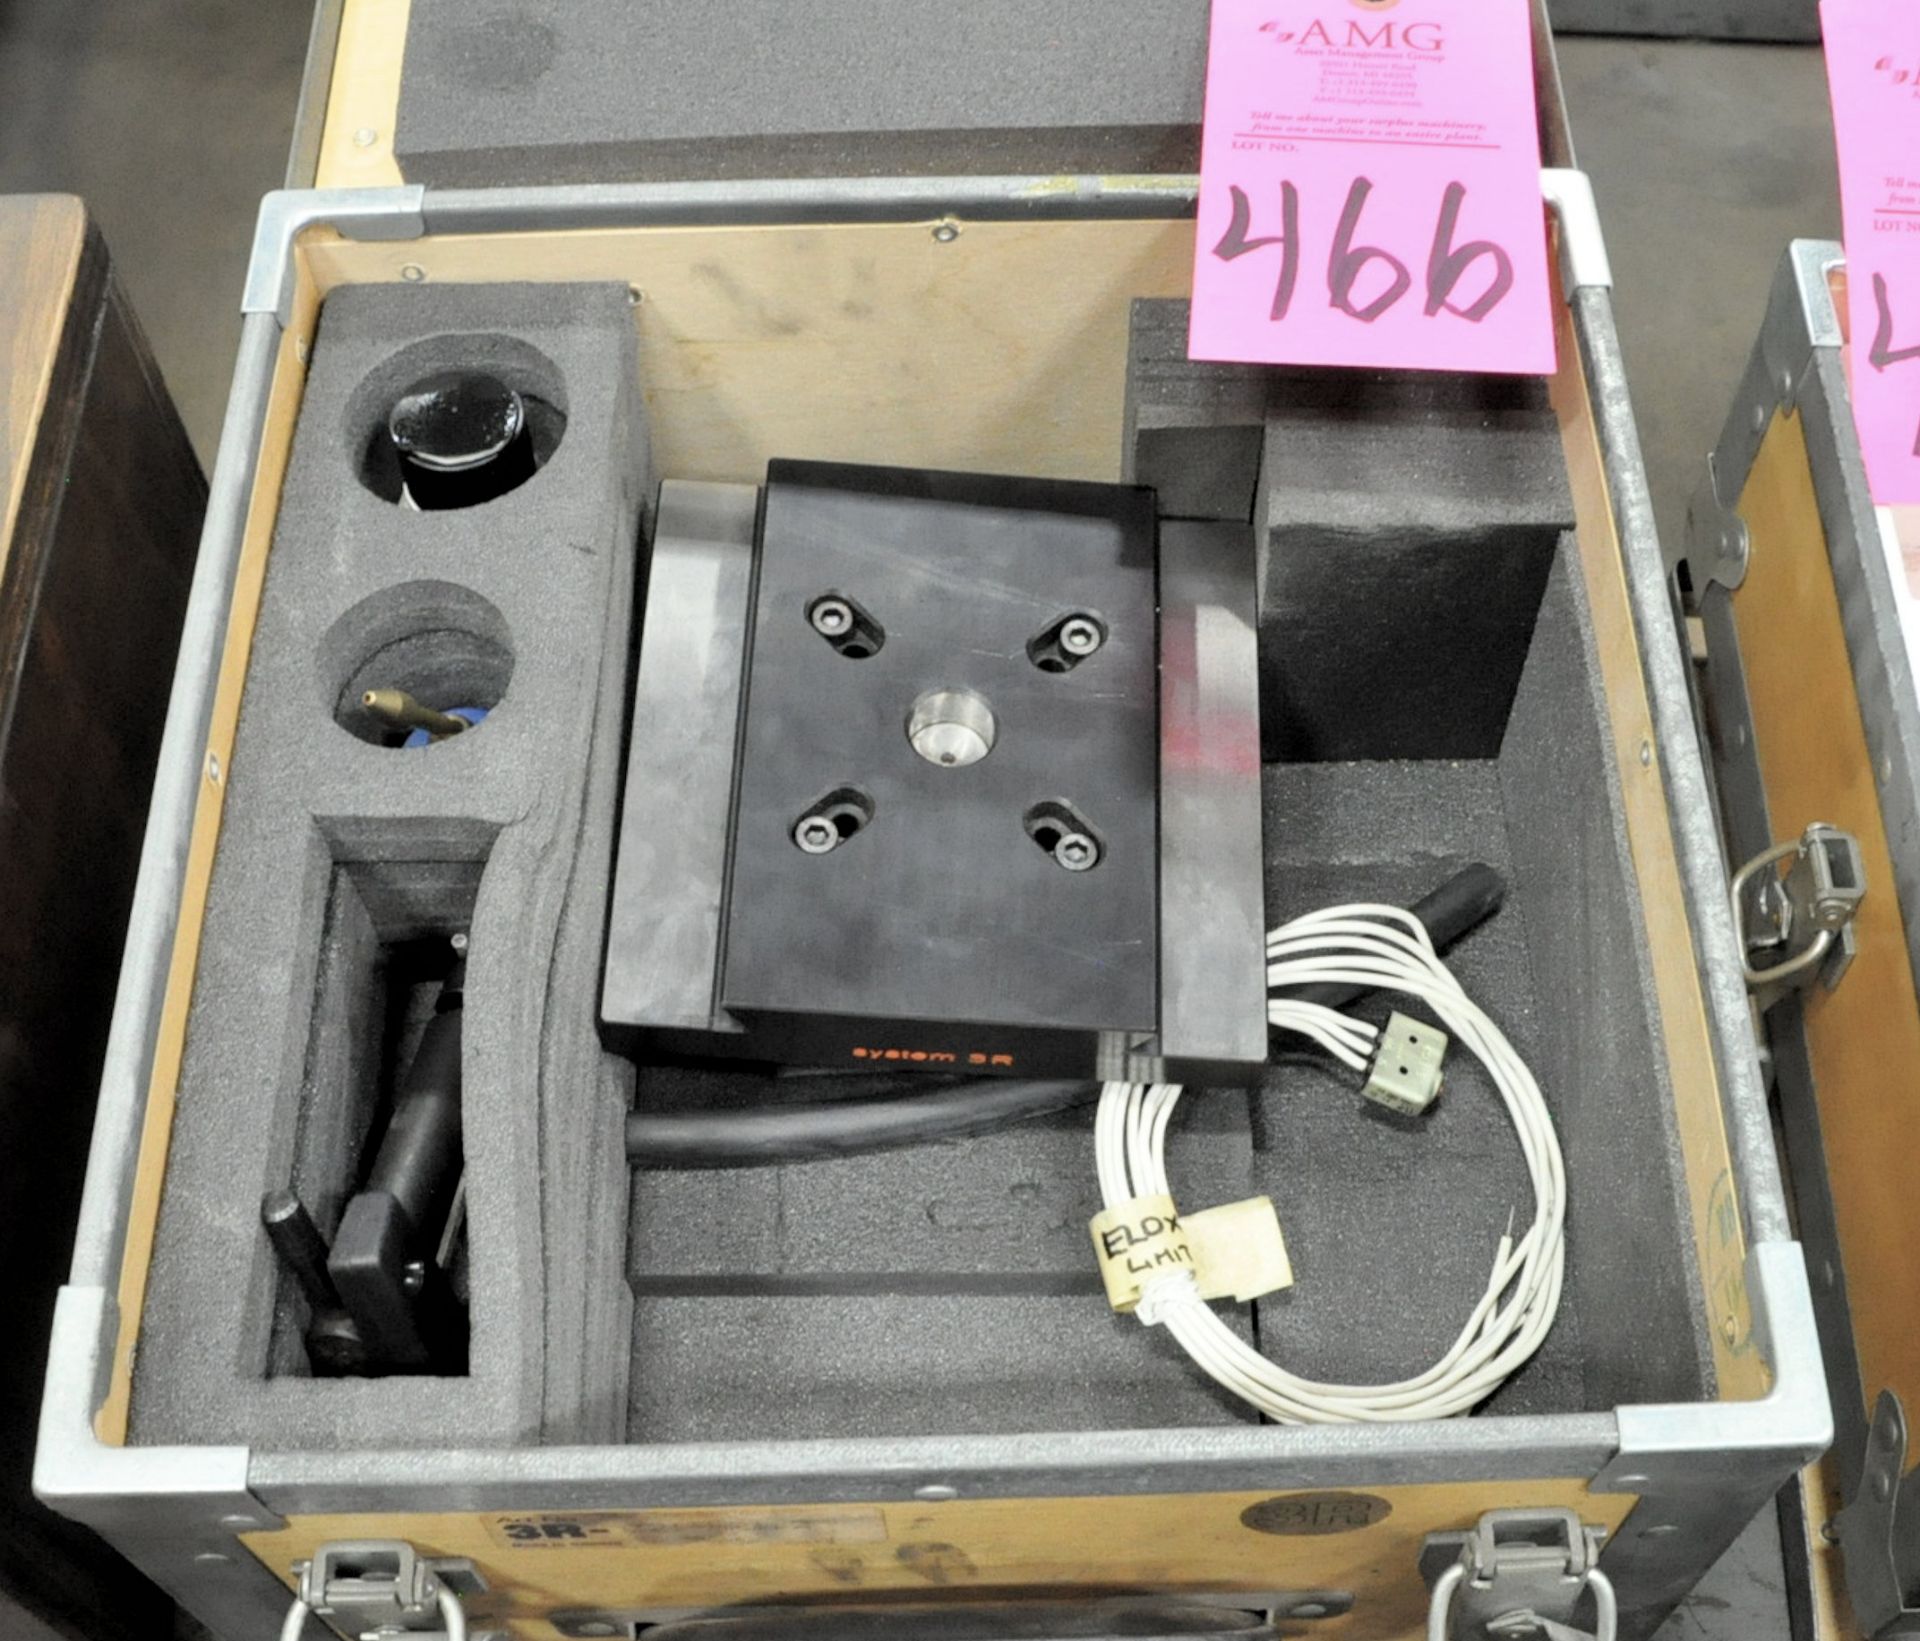 System 3R Model 321-H1, Mini Aromatic Spindle Chuck Tooling in (1) Box, (D-9), (Pink Tag)